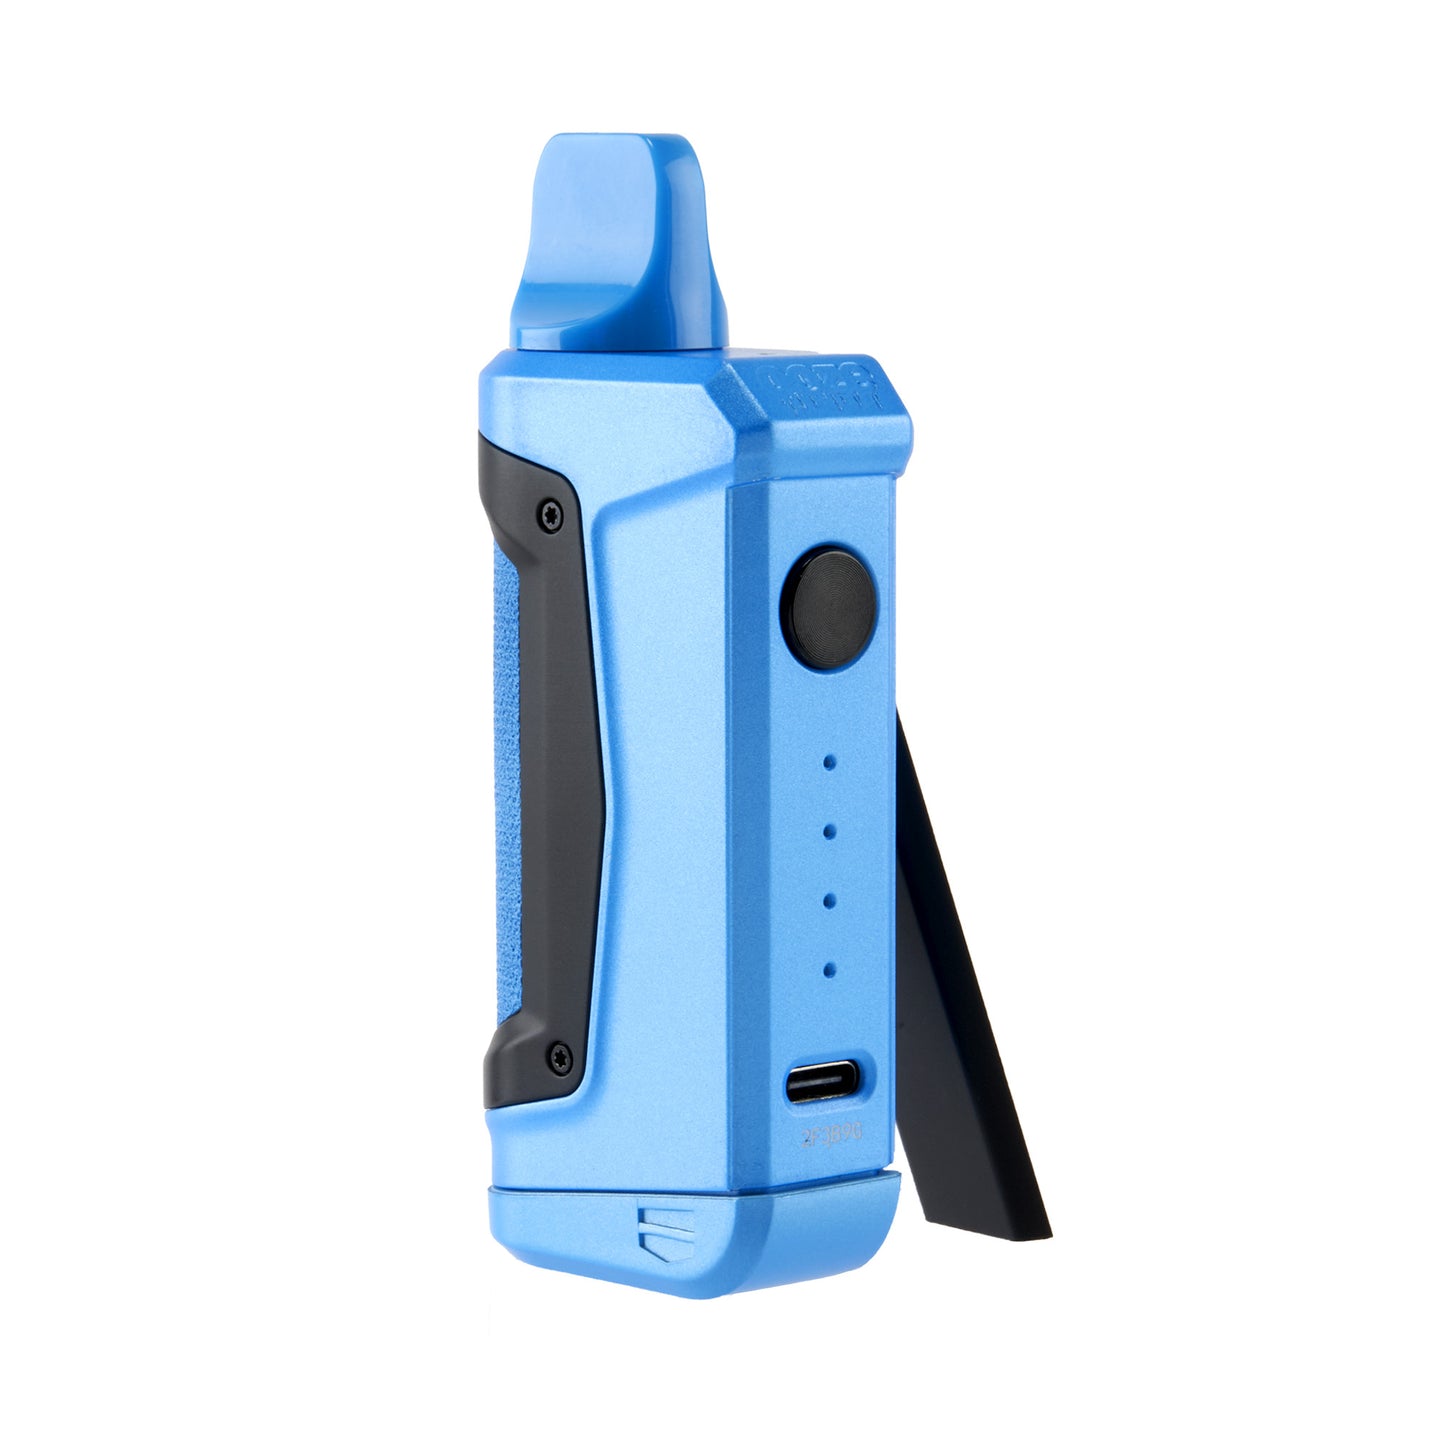 The arctic blue Ooze Duplex 2 extract vaporizer is shown with the magnetic plate leaning against it to show the interface